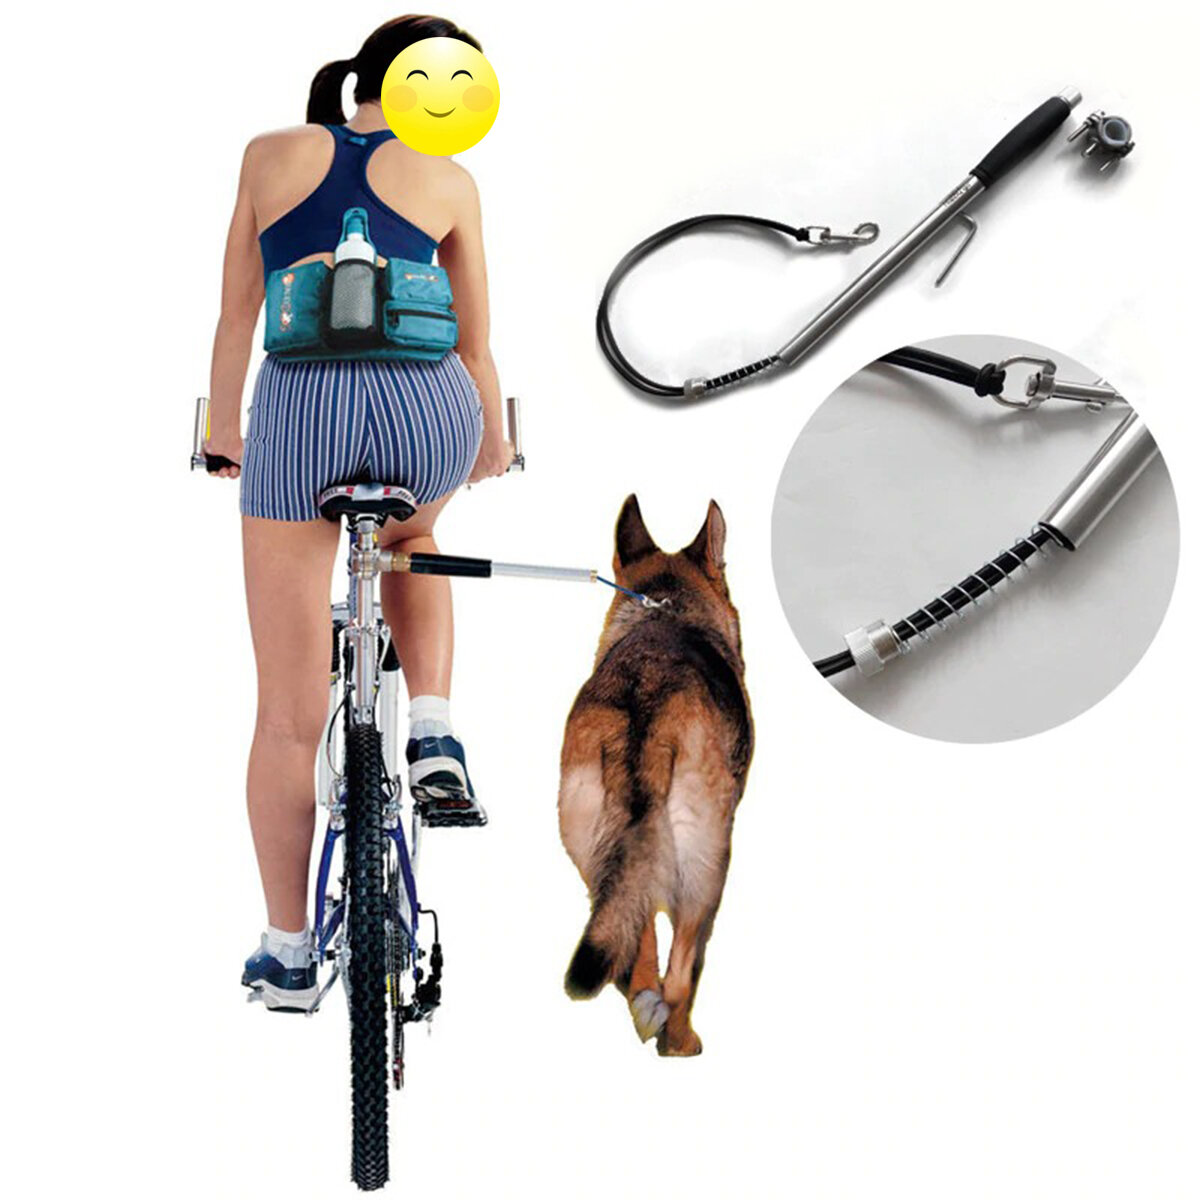 

Dog Bicycle Leash Hands Free Lead Pet Walker Run Train Ride Bike Distance Keeper Dog Leash for Exercising/Training